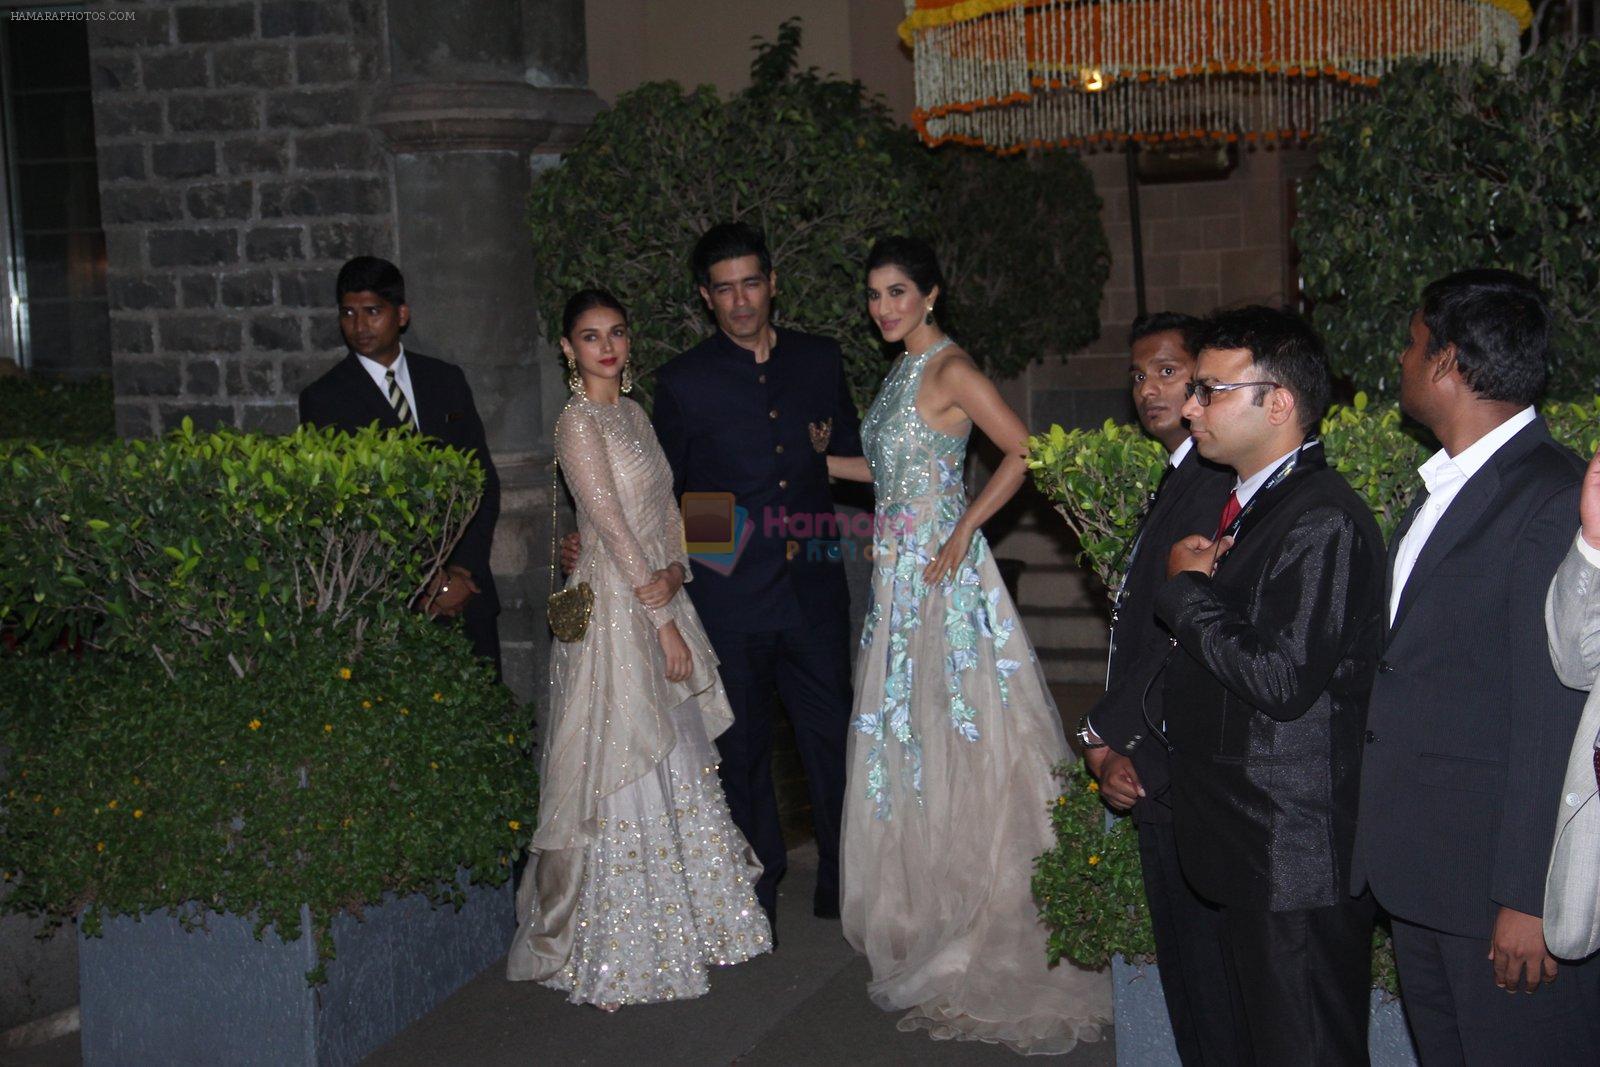 Alia Bhatt at the Royal dinner by Prince William & Kate Middleton on 10th April 2016